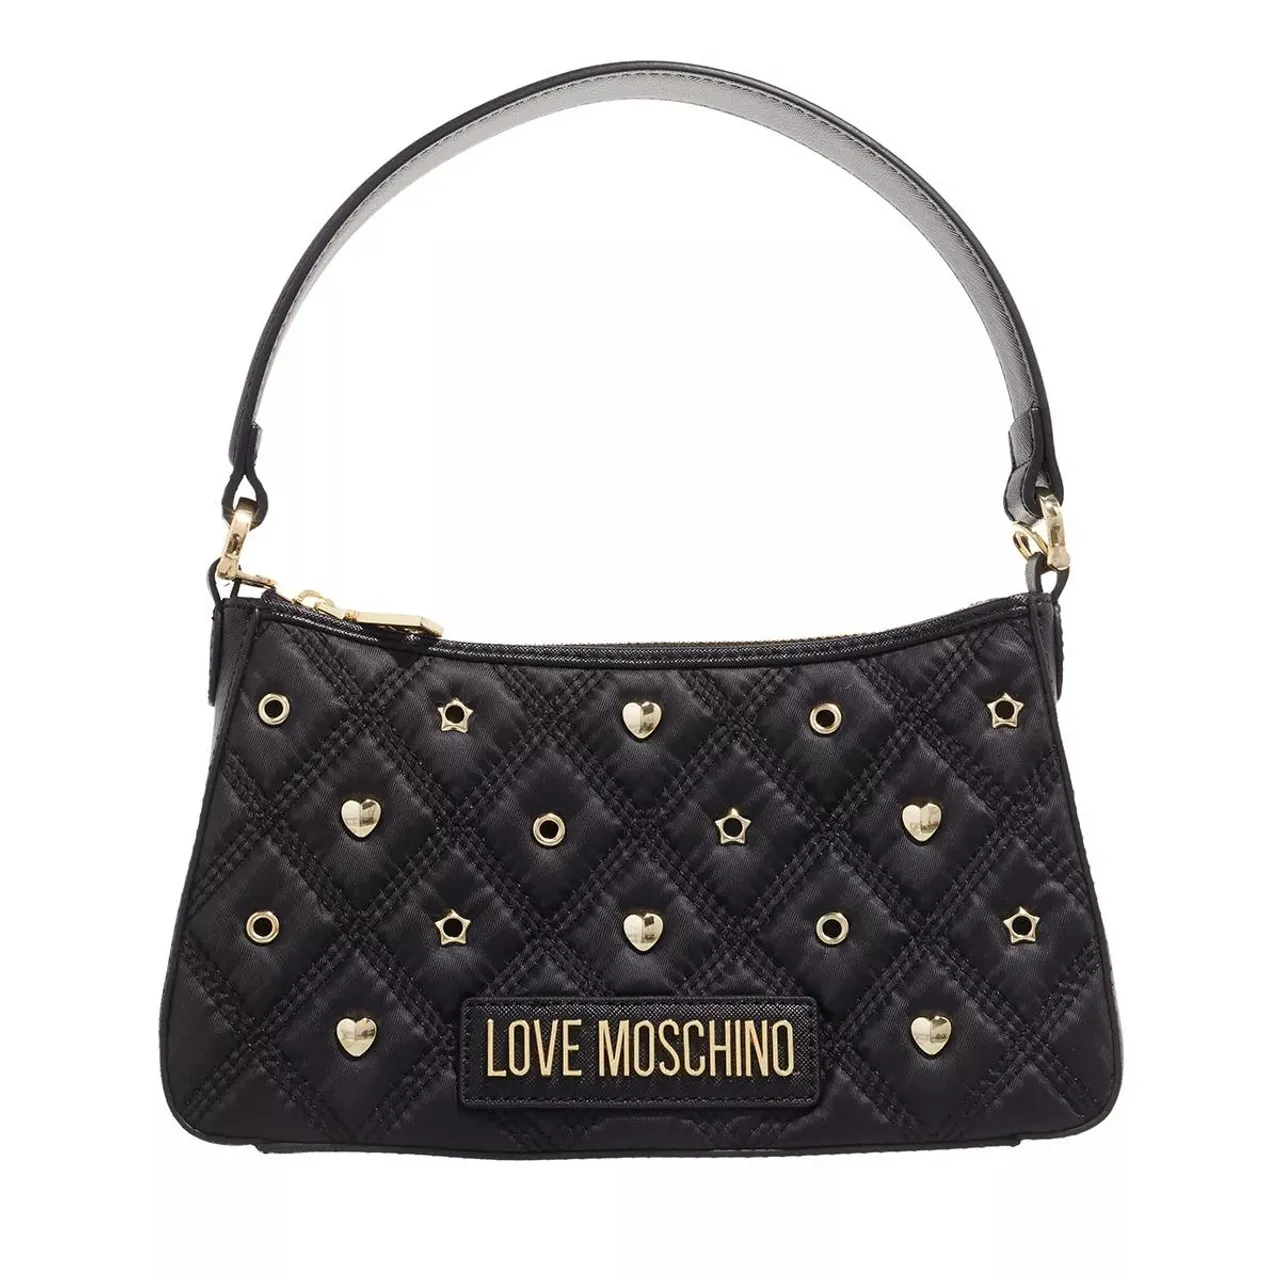 Love Moschino Tote Bags - Nylon Eyelets - black - Tote Bags for ladies